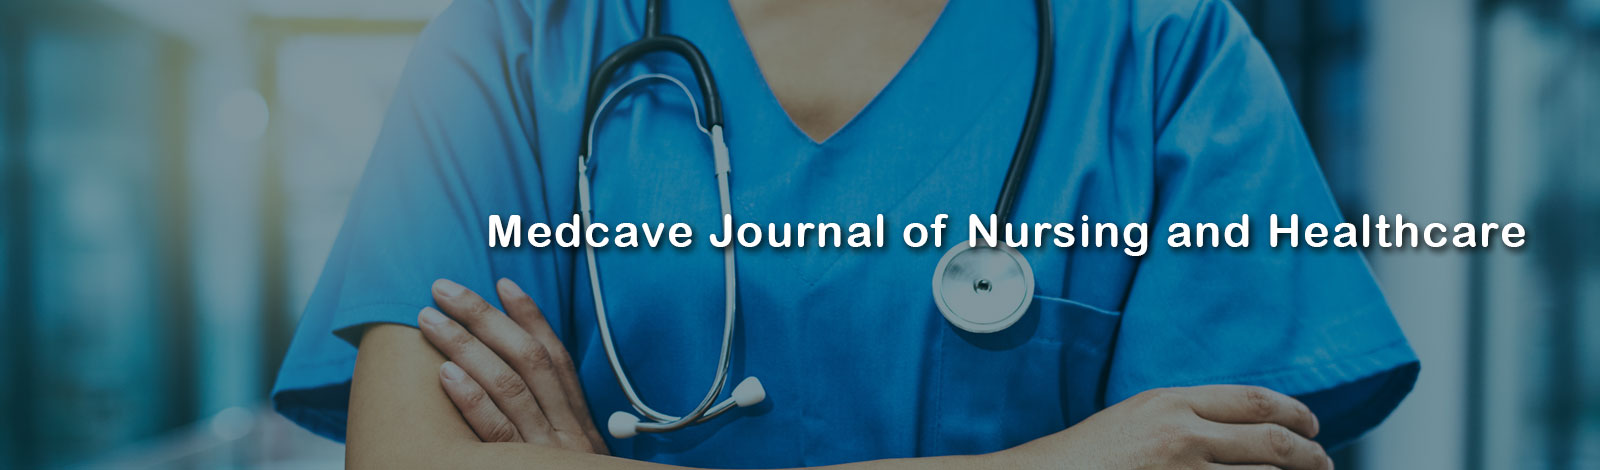 Medcave Journal of Nursing and Healthcare